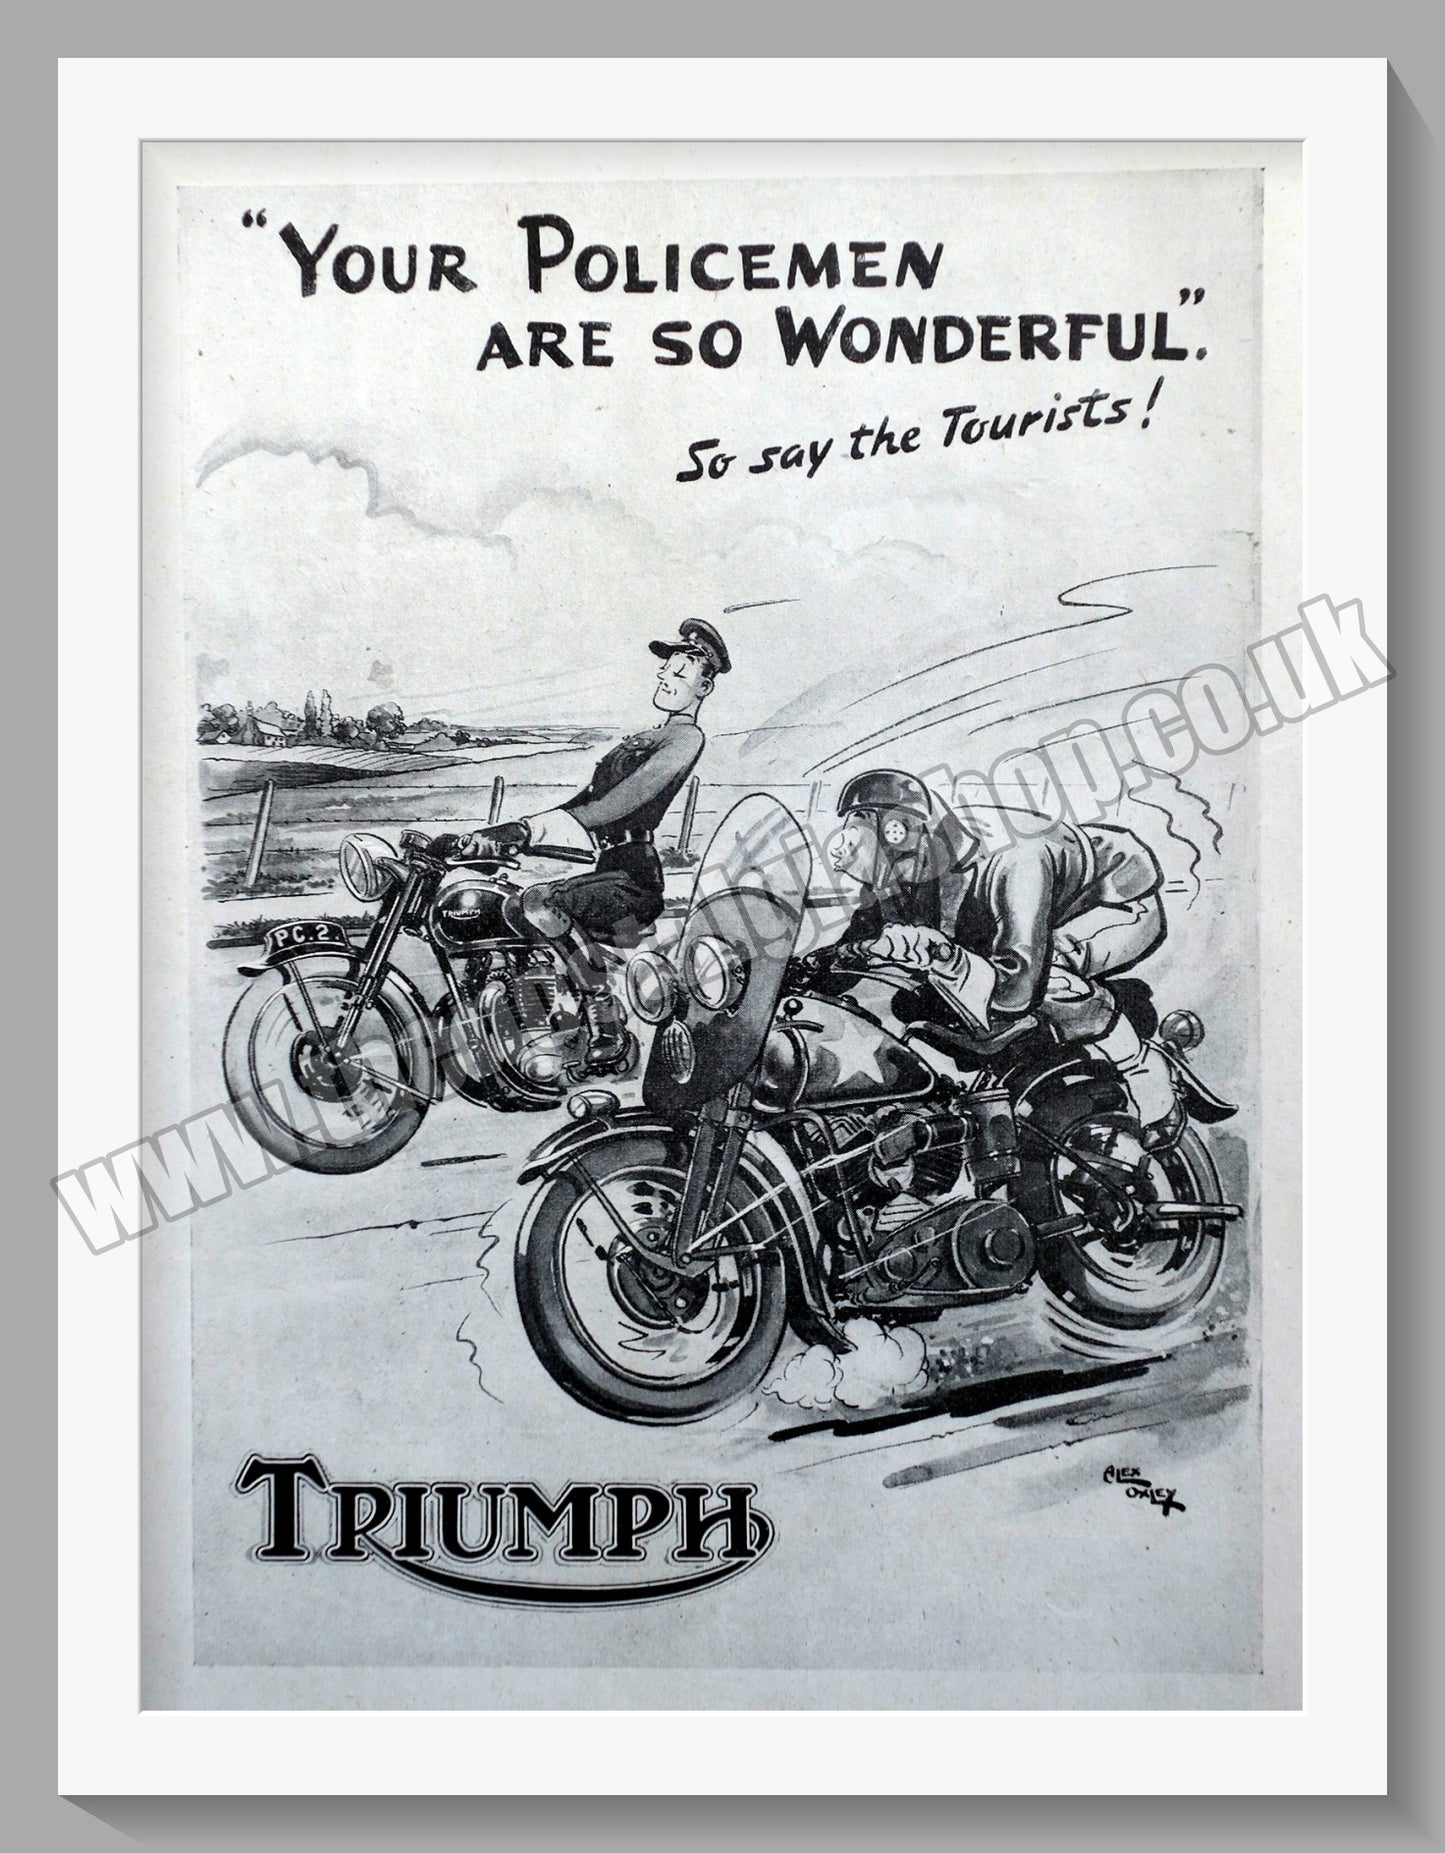 Triumph Motorcycles for the Police Forces. Original advert 1945 (ref AD57931)